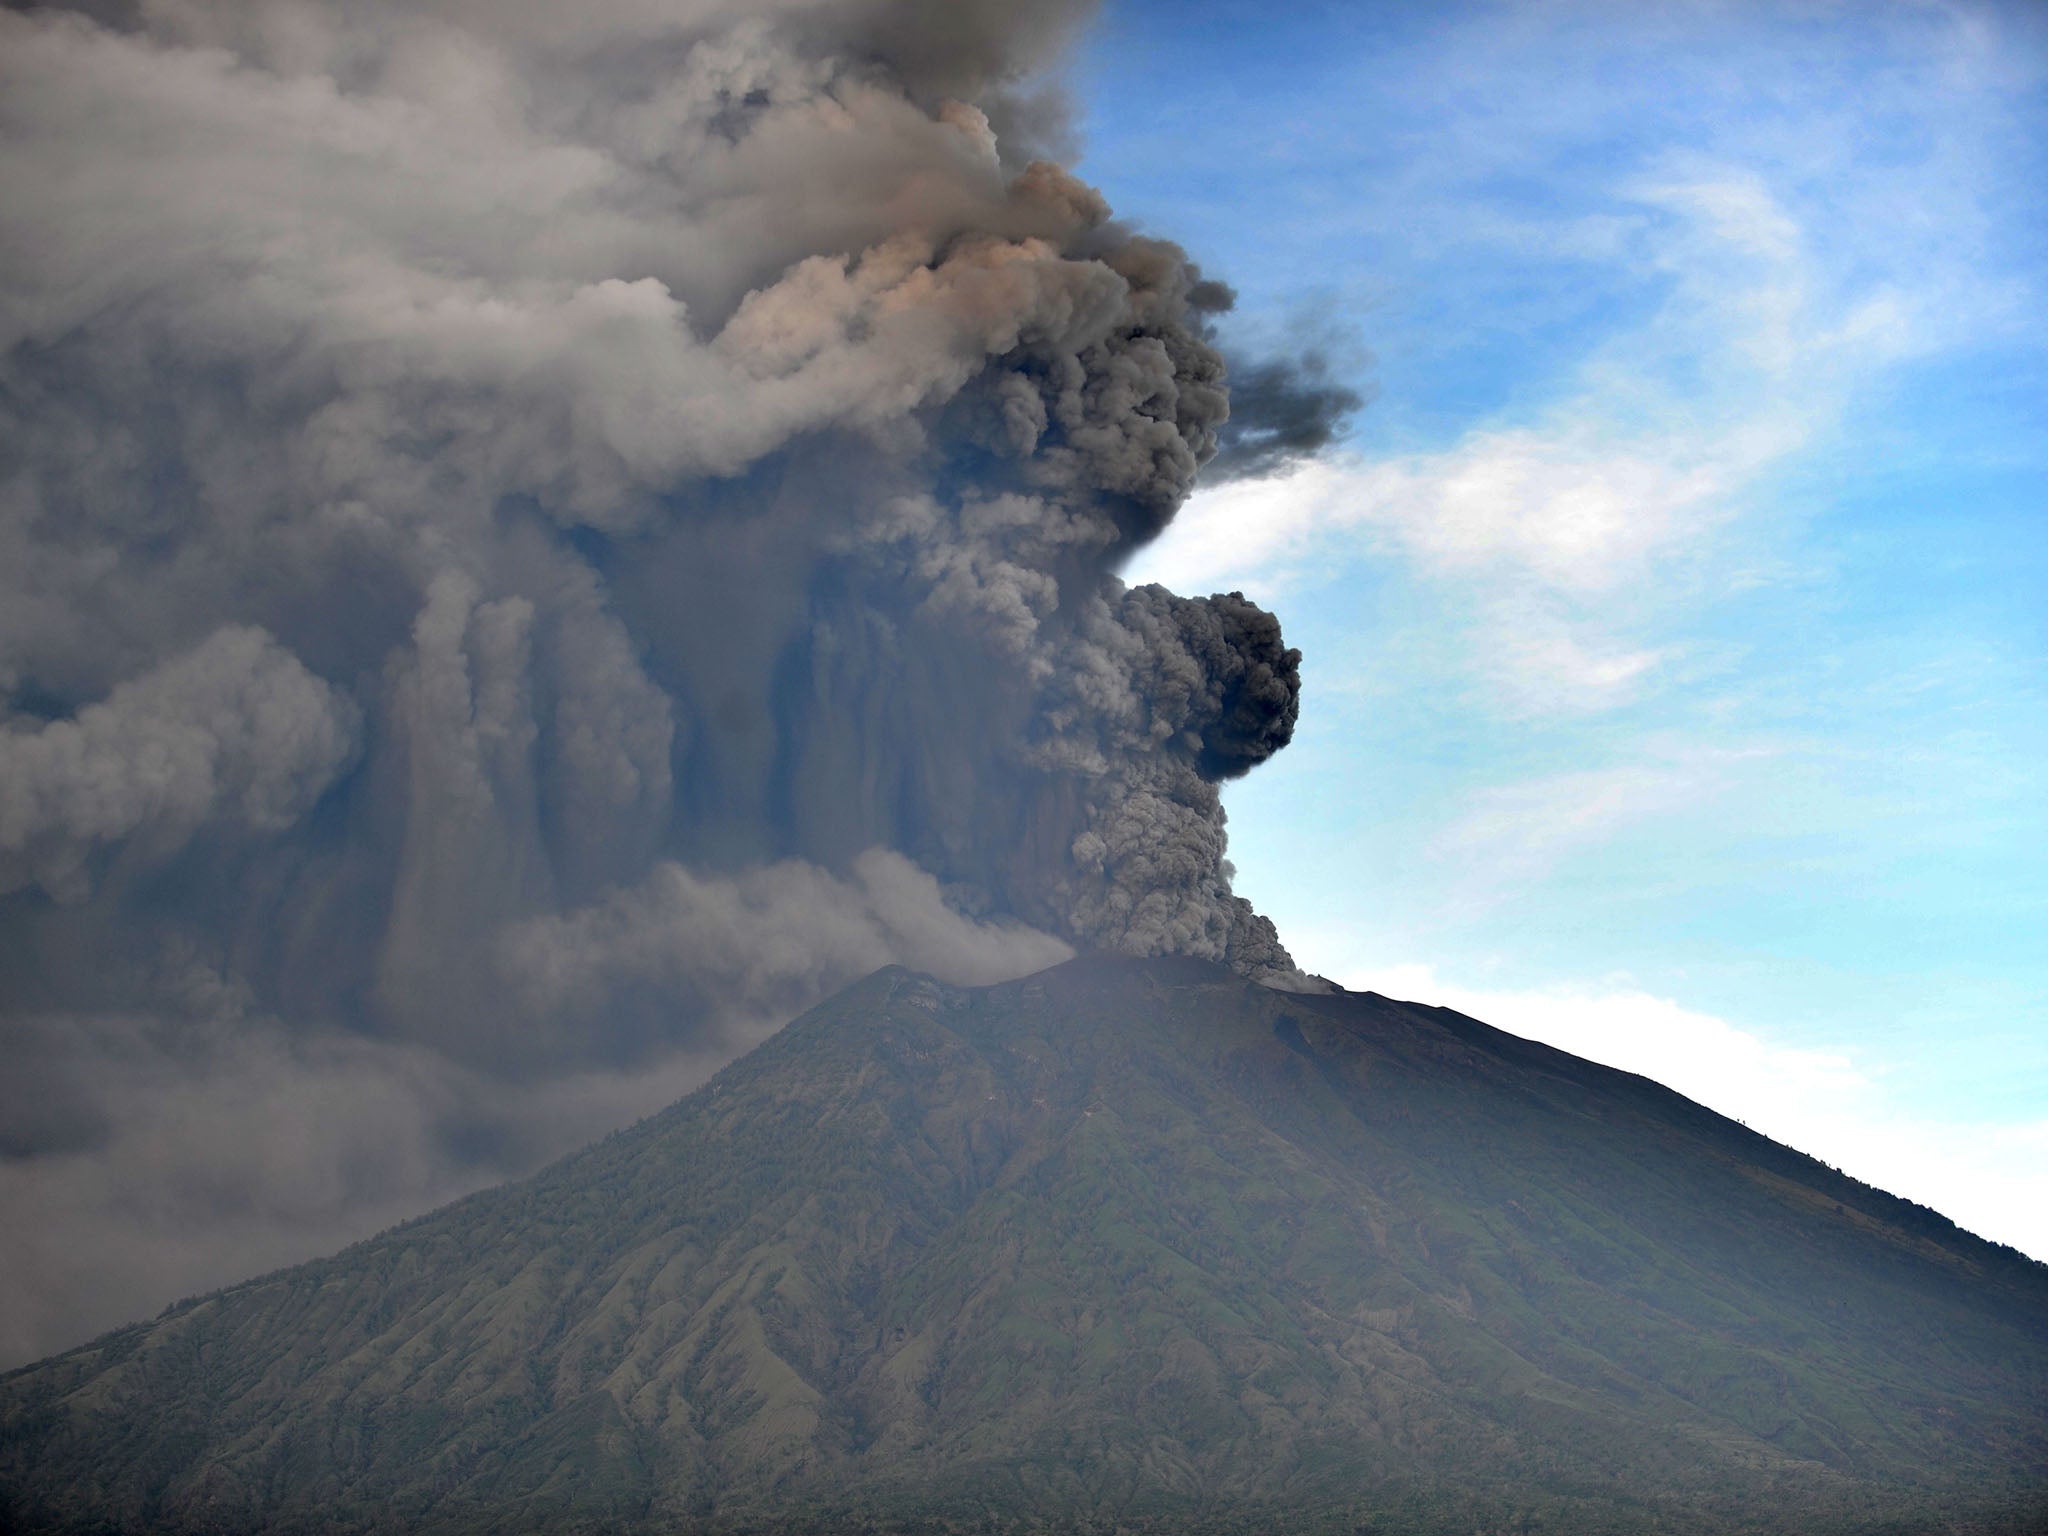 If the Mount Agung eruption becomes powerful enough, it could have a measurable cooling effect